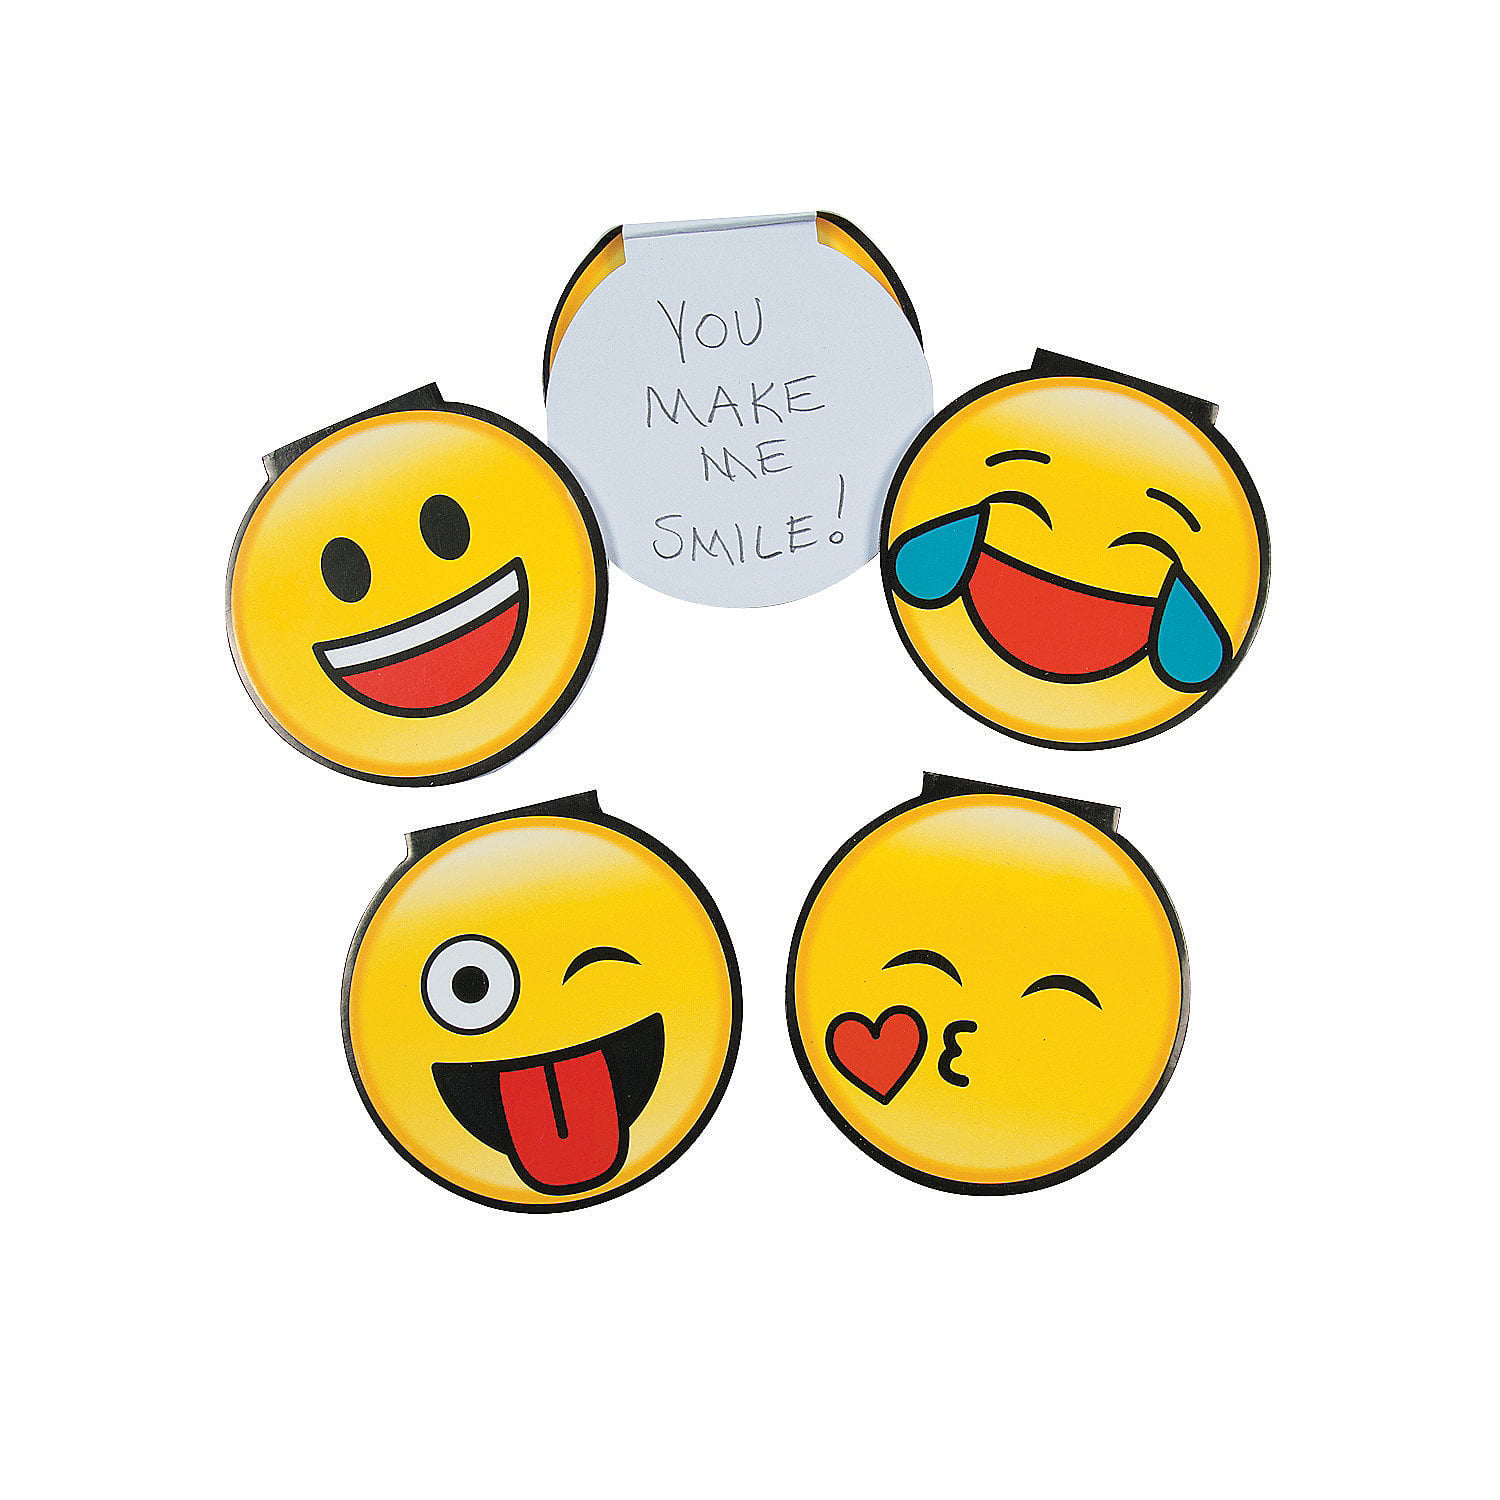 Stationery Supplies for School and Office for Kids and Adults Cute Party Favors Small Emoji Note Memo Pads with Colorful Rainbow Covers Pack of 12 ArtCreativity Mini Smile Face Notepads 